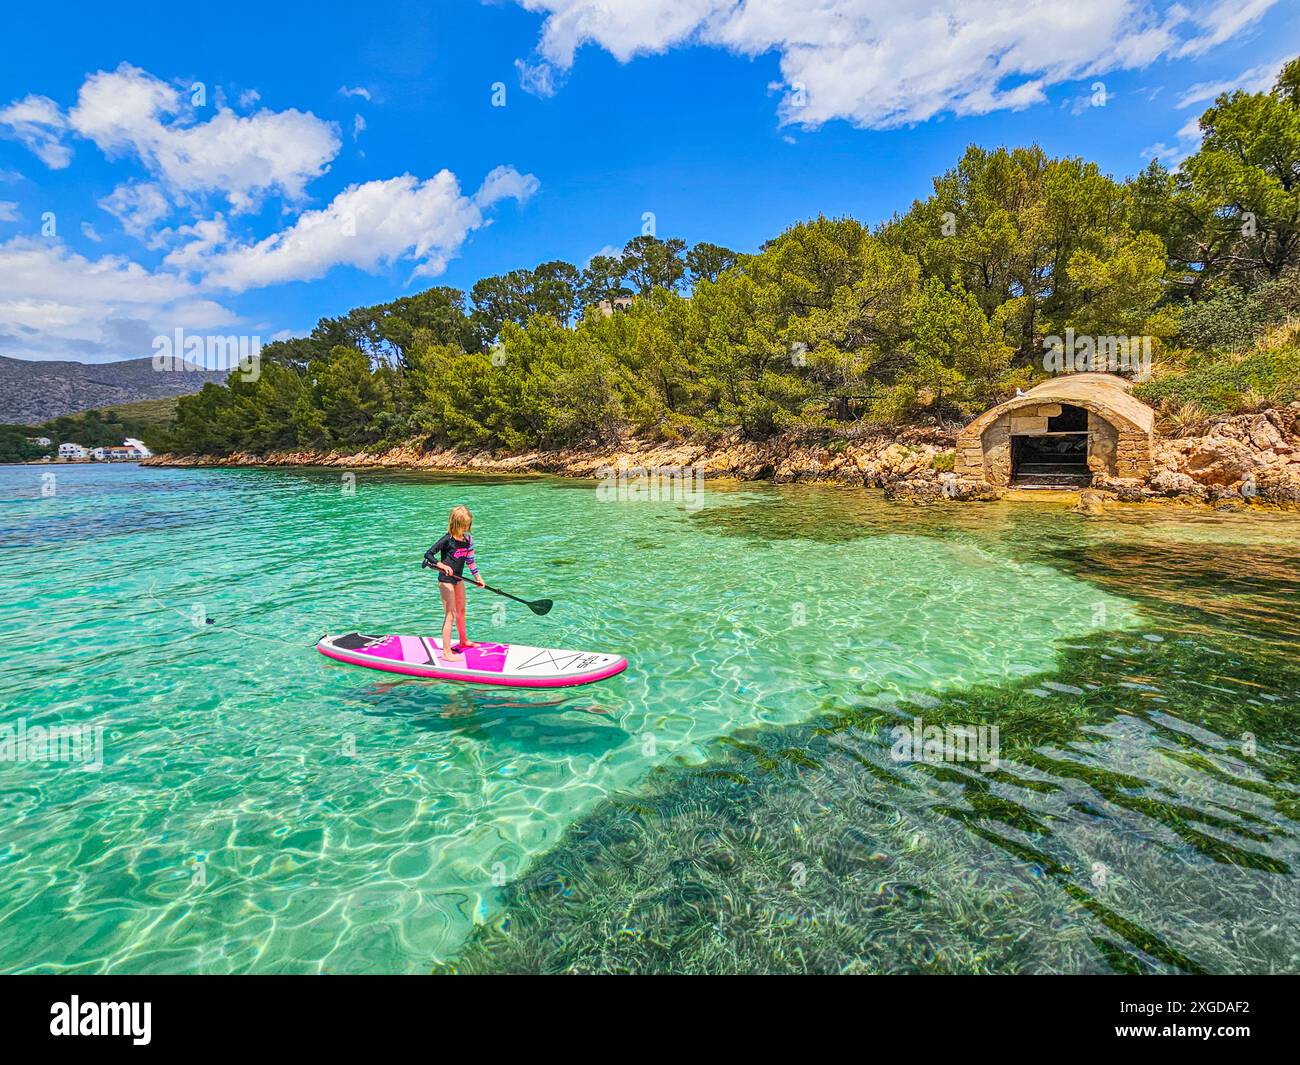 Girl on a SUP in the turquoise waters of the Formentor Peninsula, Mallorca, Balearic islands, Spain, Mediterranean, Europe Stock Photo